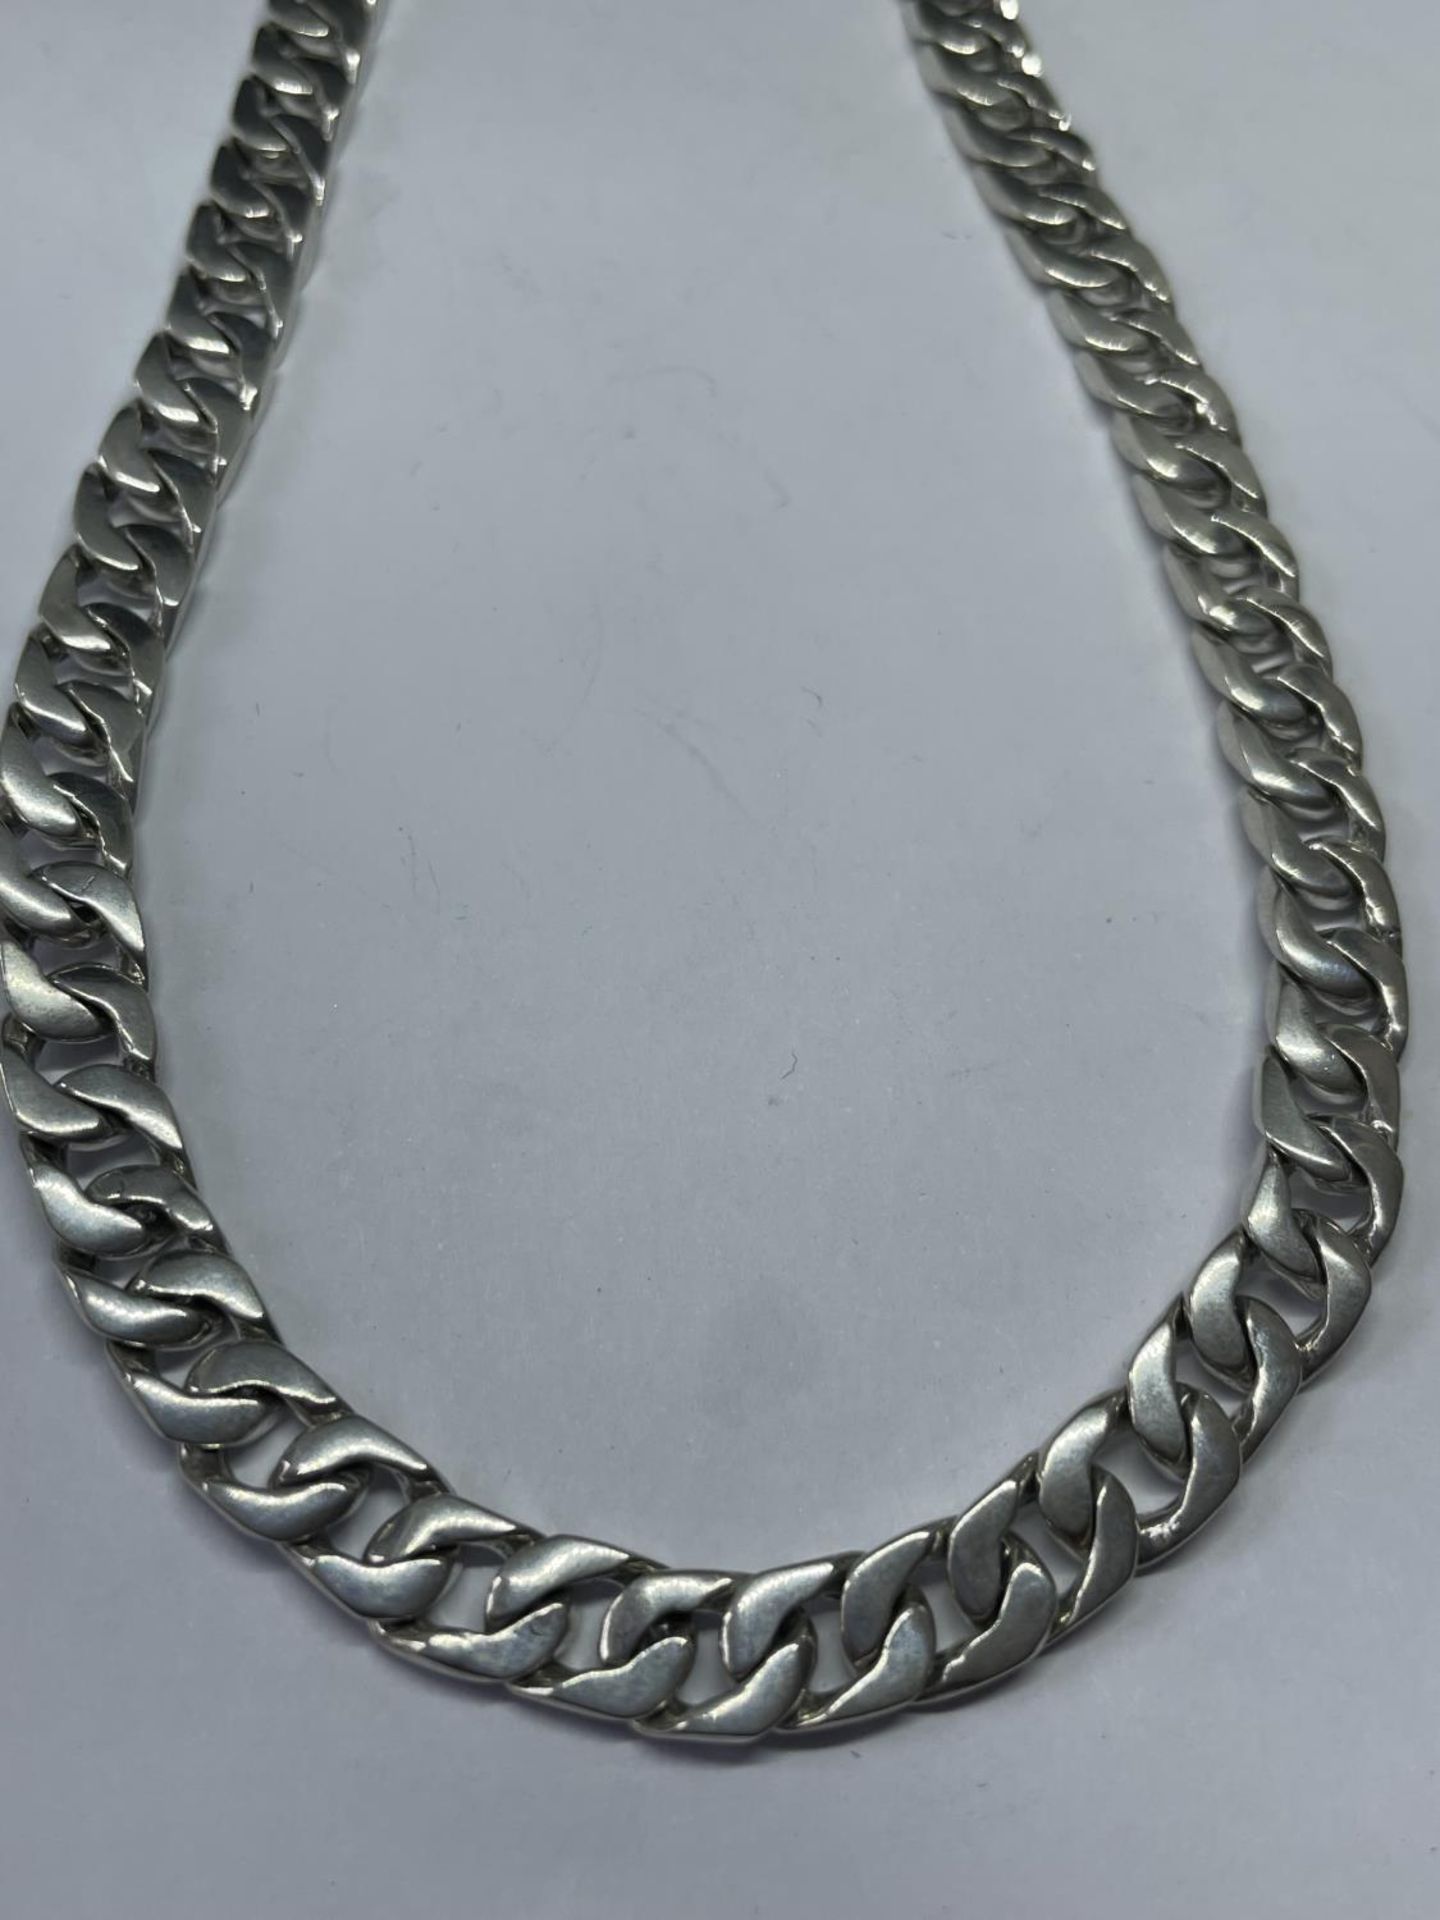 A HEAVY MARKED SILVER NECKLACE LENGTH 22 INCHES - Image 2 of 3